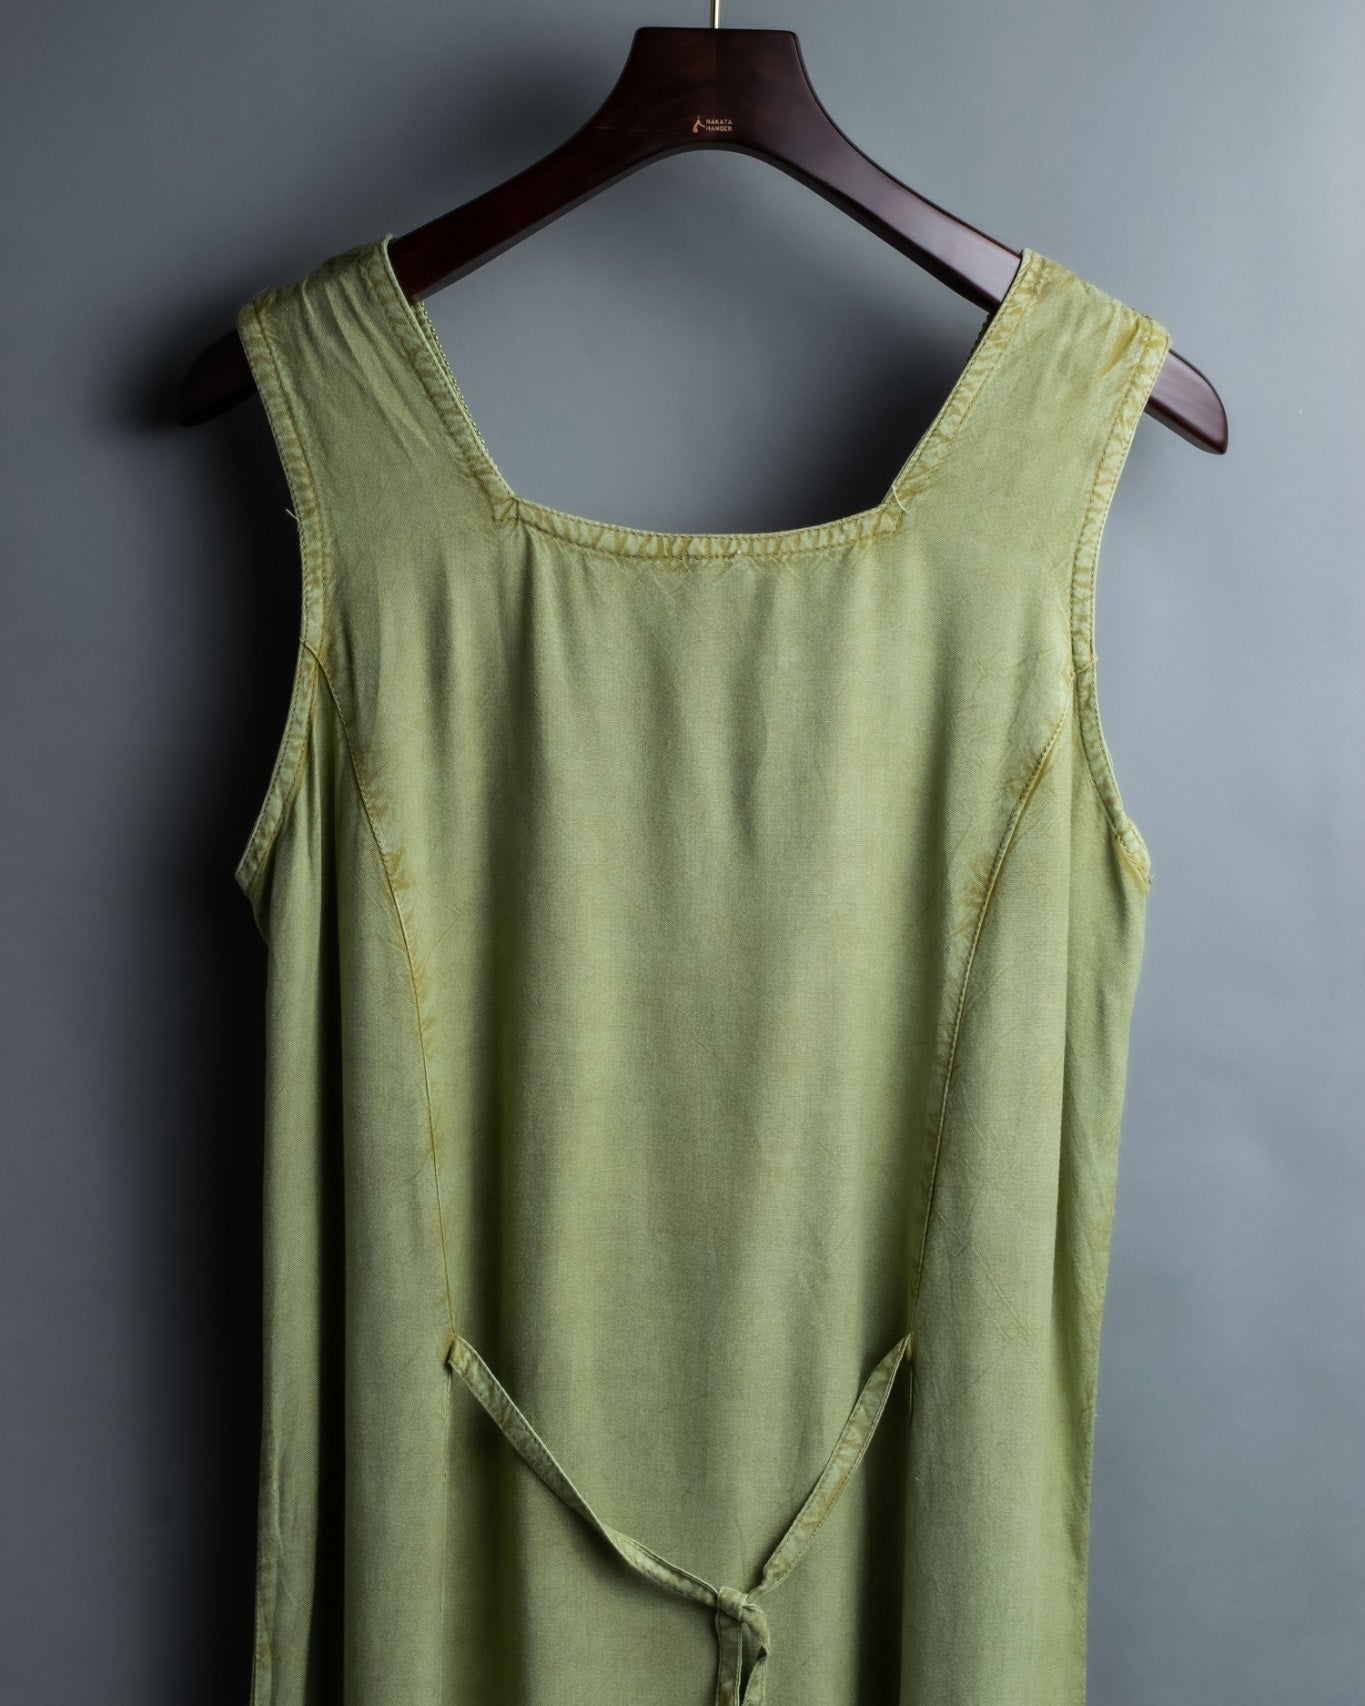 Vintage Embroidered Tank Top